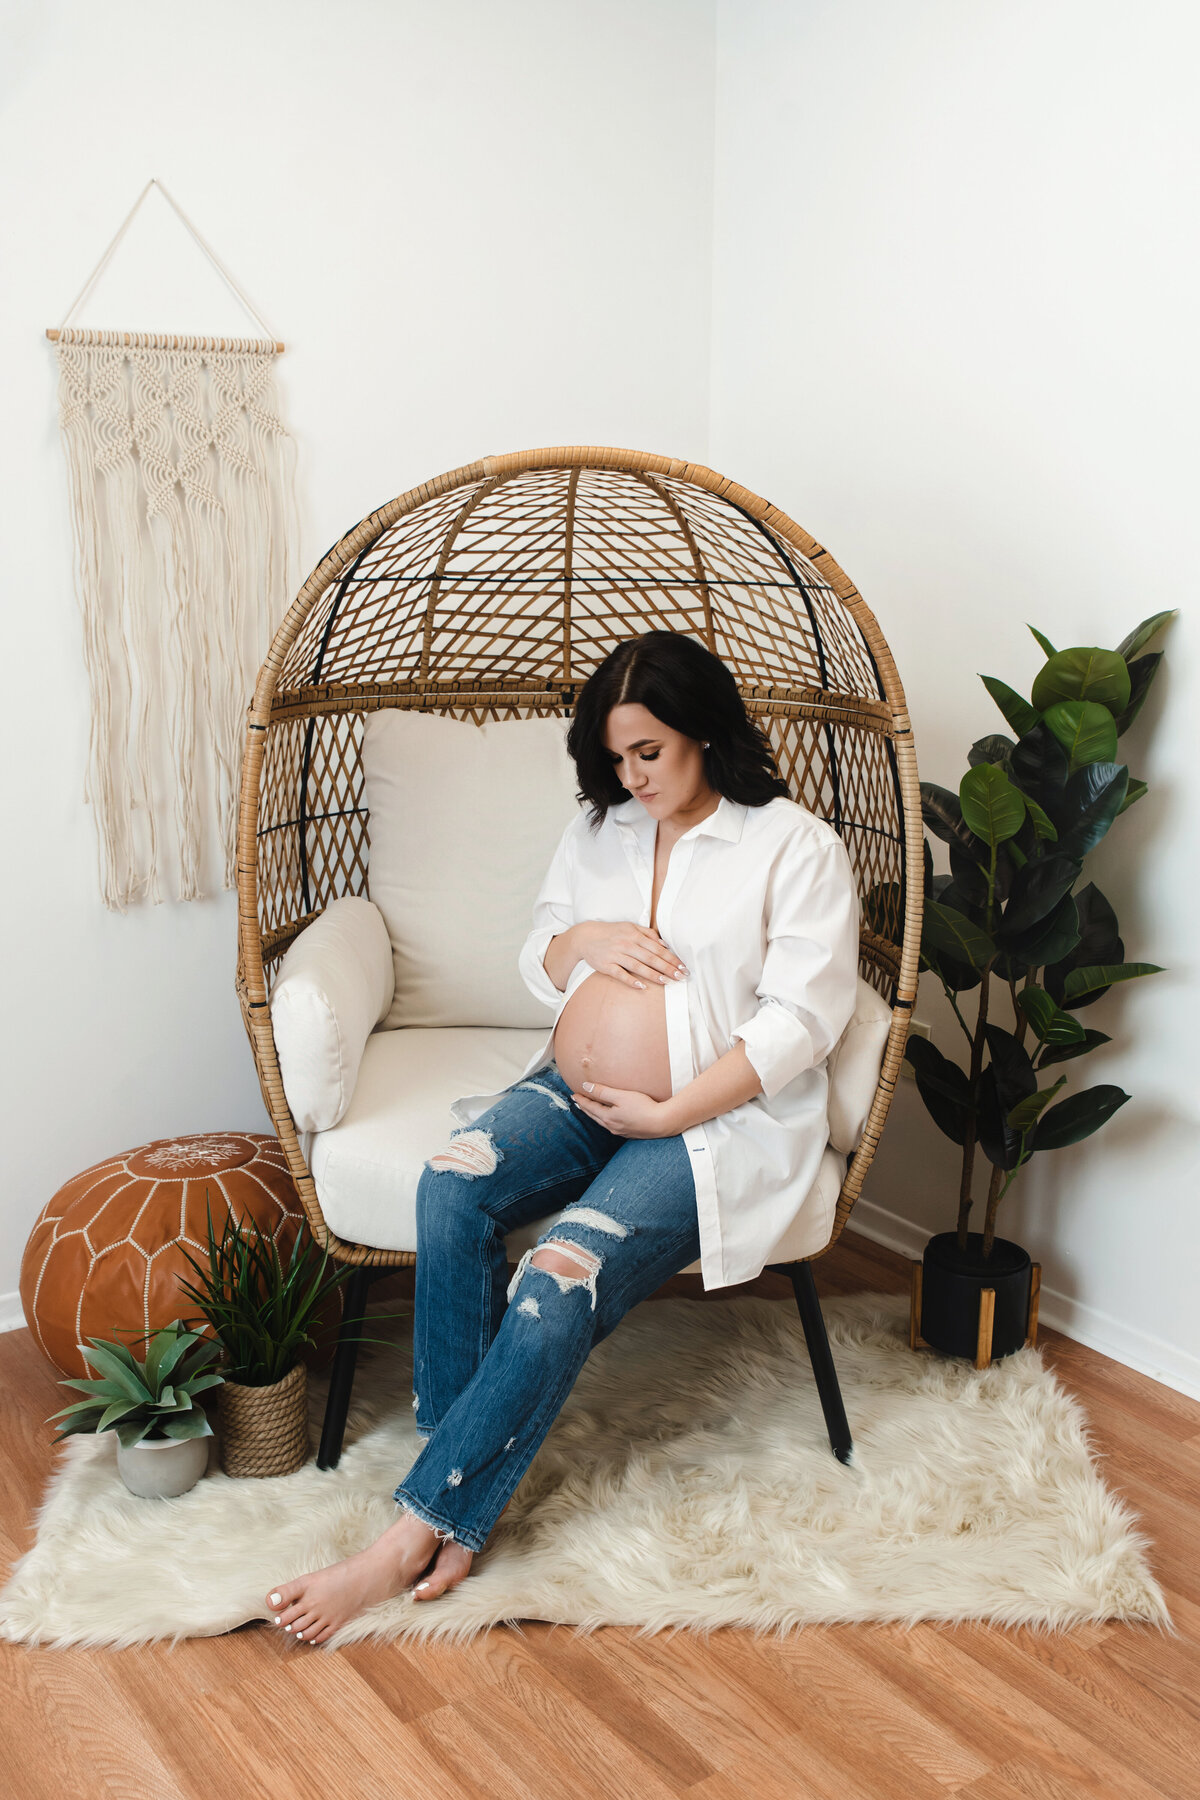 pregnant mom with jeans and white shirt sits on egg chair with boho setup